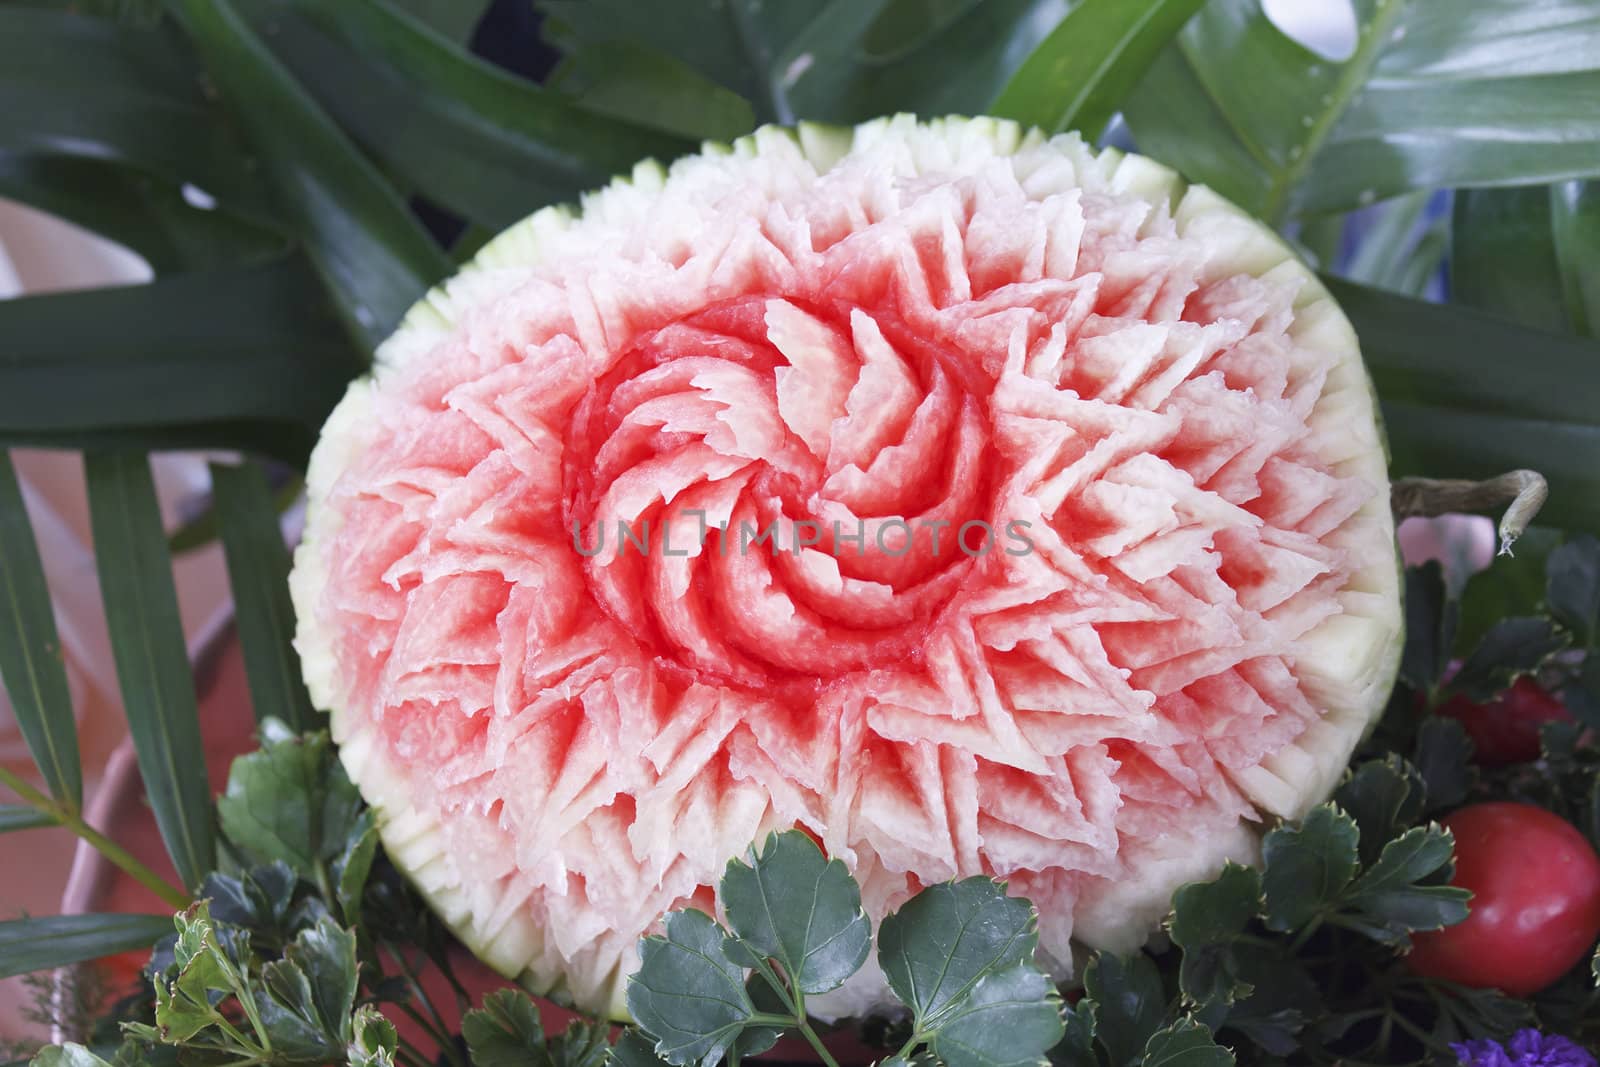 Thai art of carved watermelon like a flower